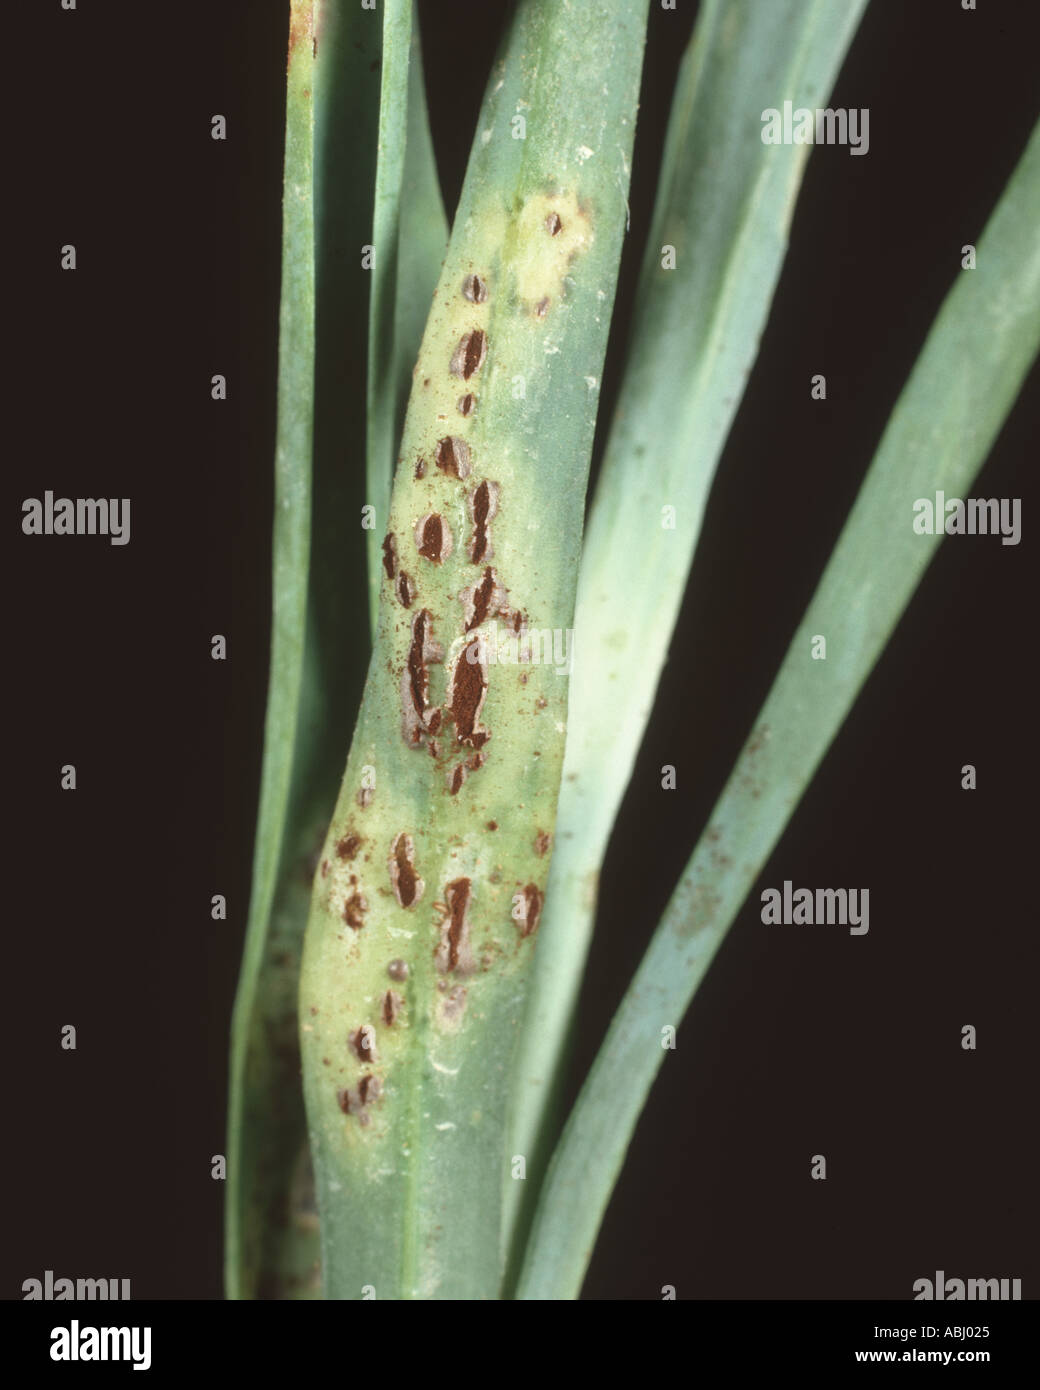 Rust pustules Puccinia dianthi erupting on the leaf base of a carnation Dianthus spp Stock Photo